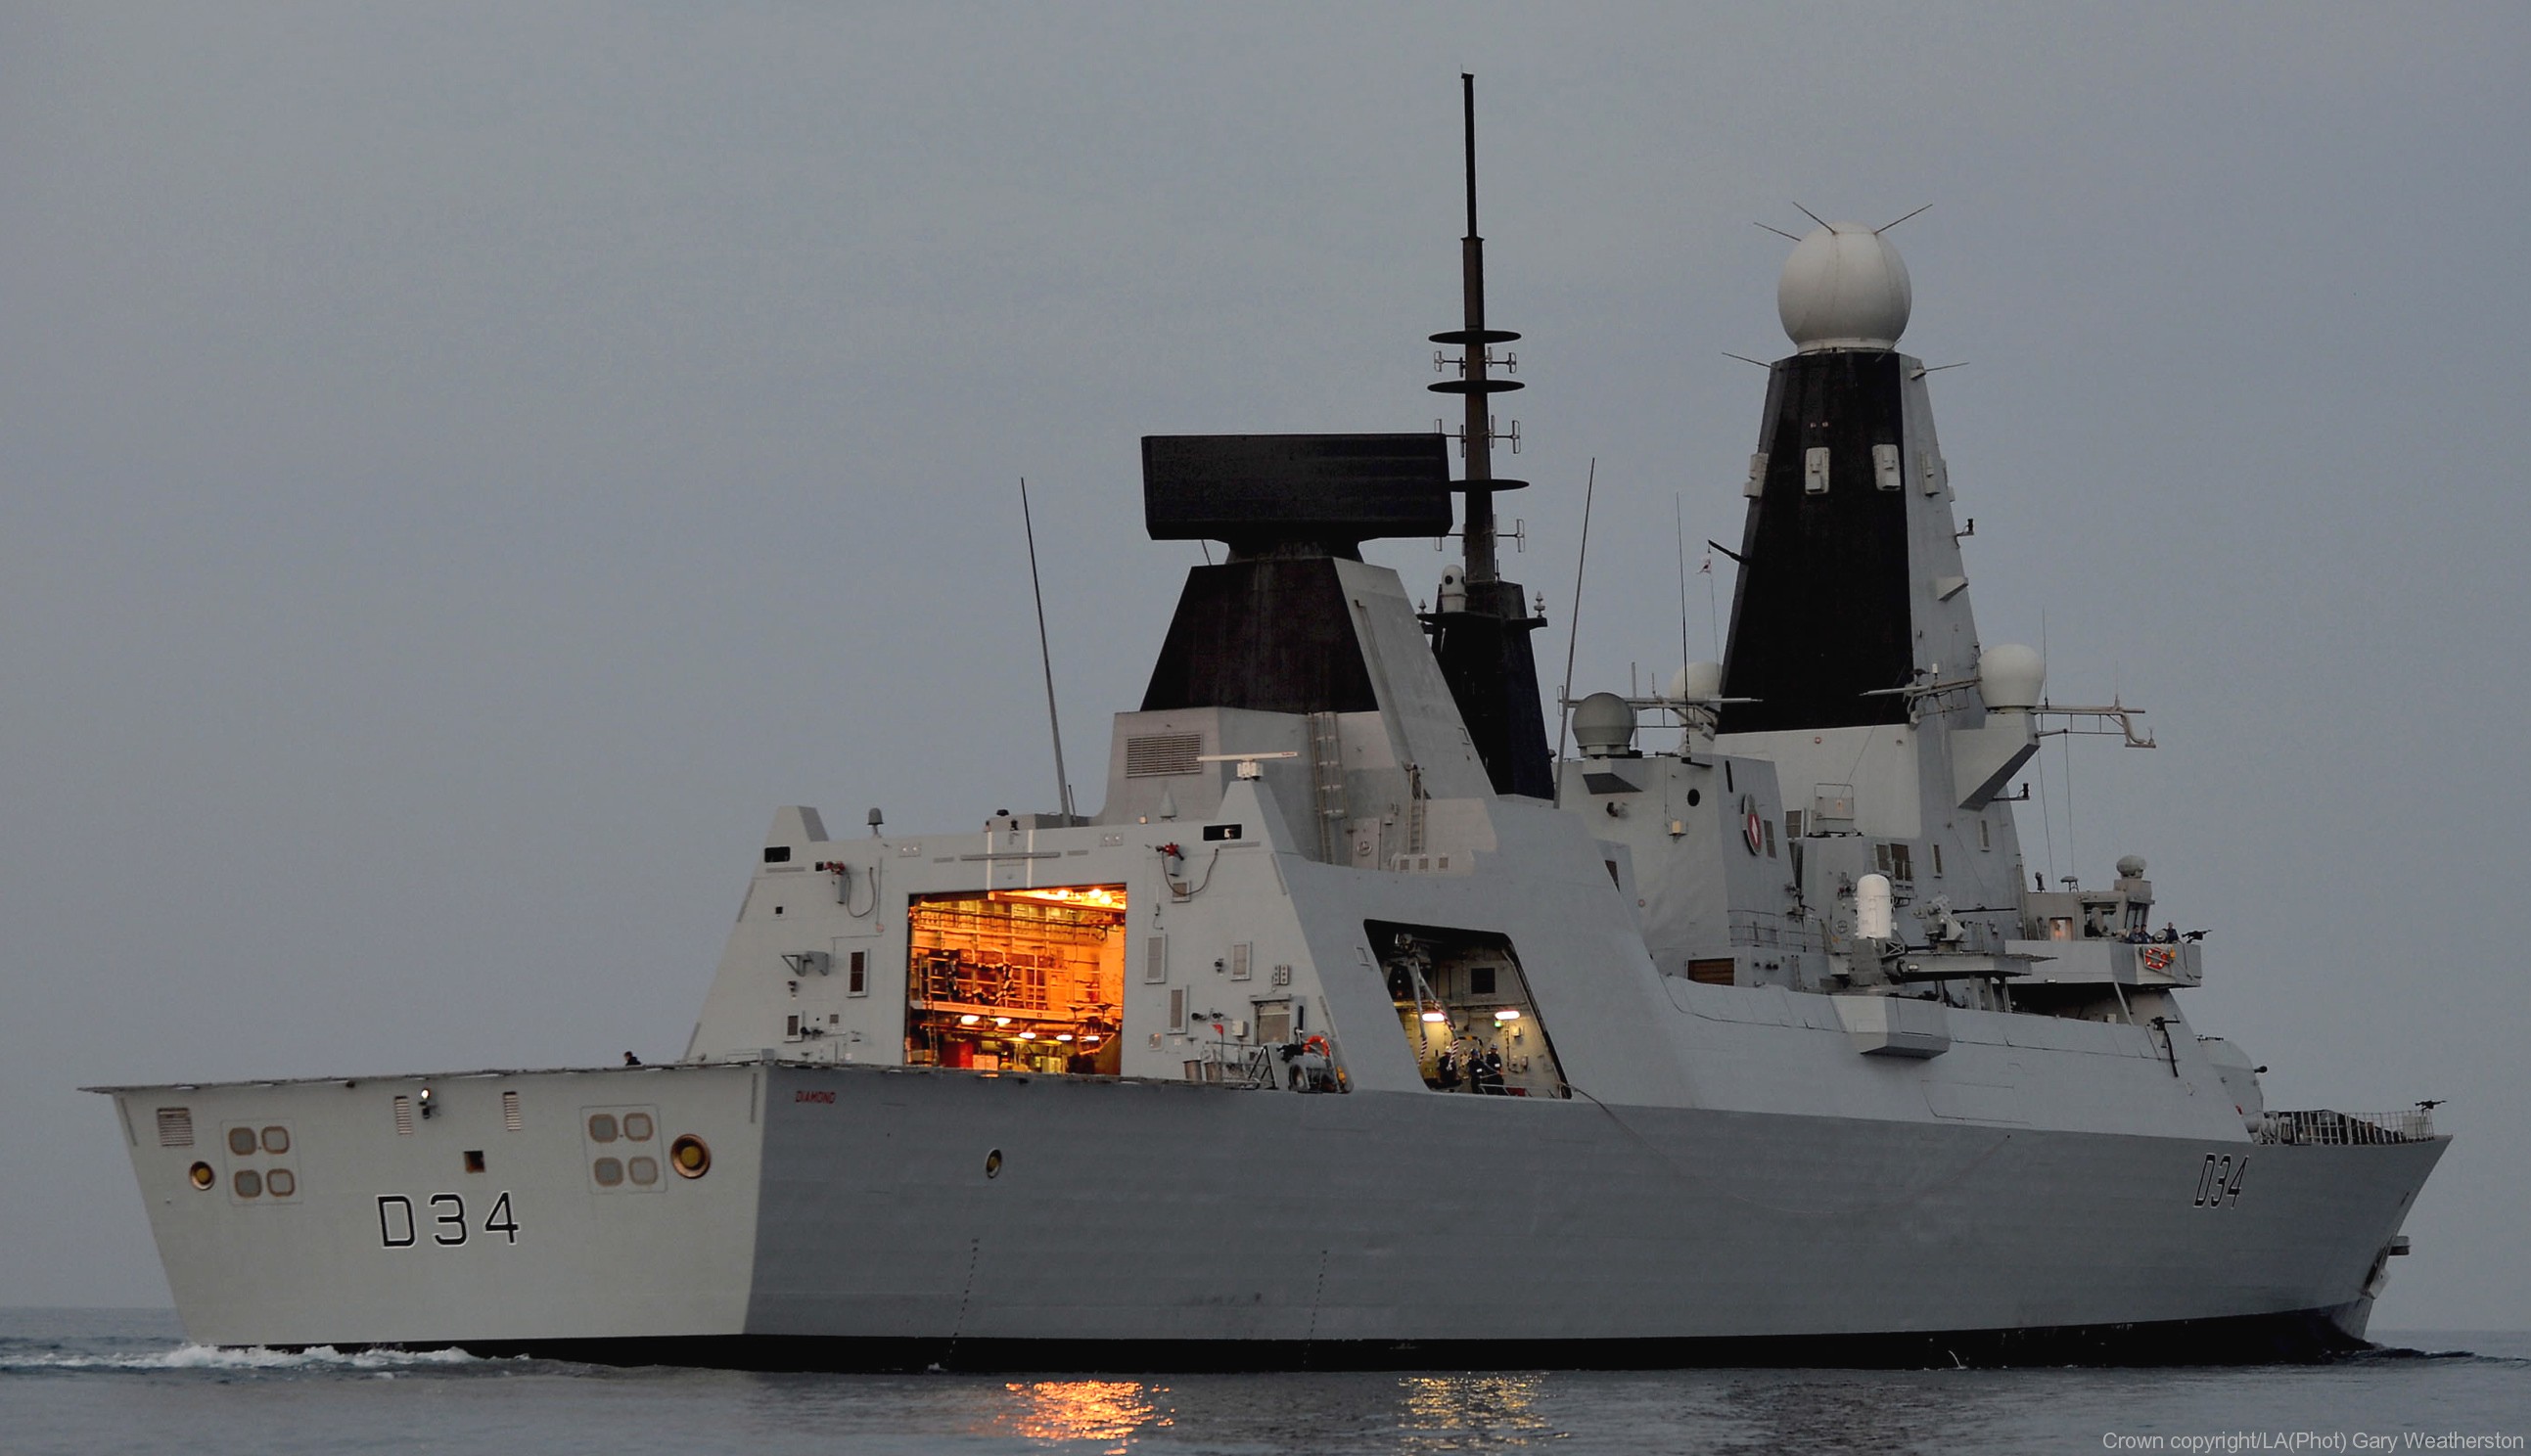 type 45 daring class guided missile destroyer ddg royal navy sea viper paams aster sam harpoon ssm d-34 hms diamond 11x